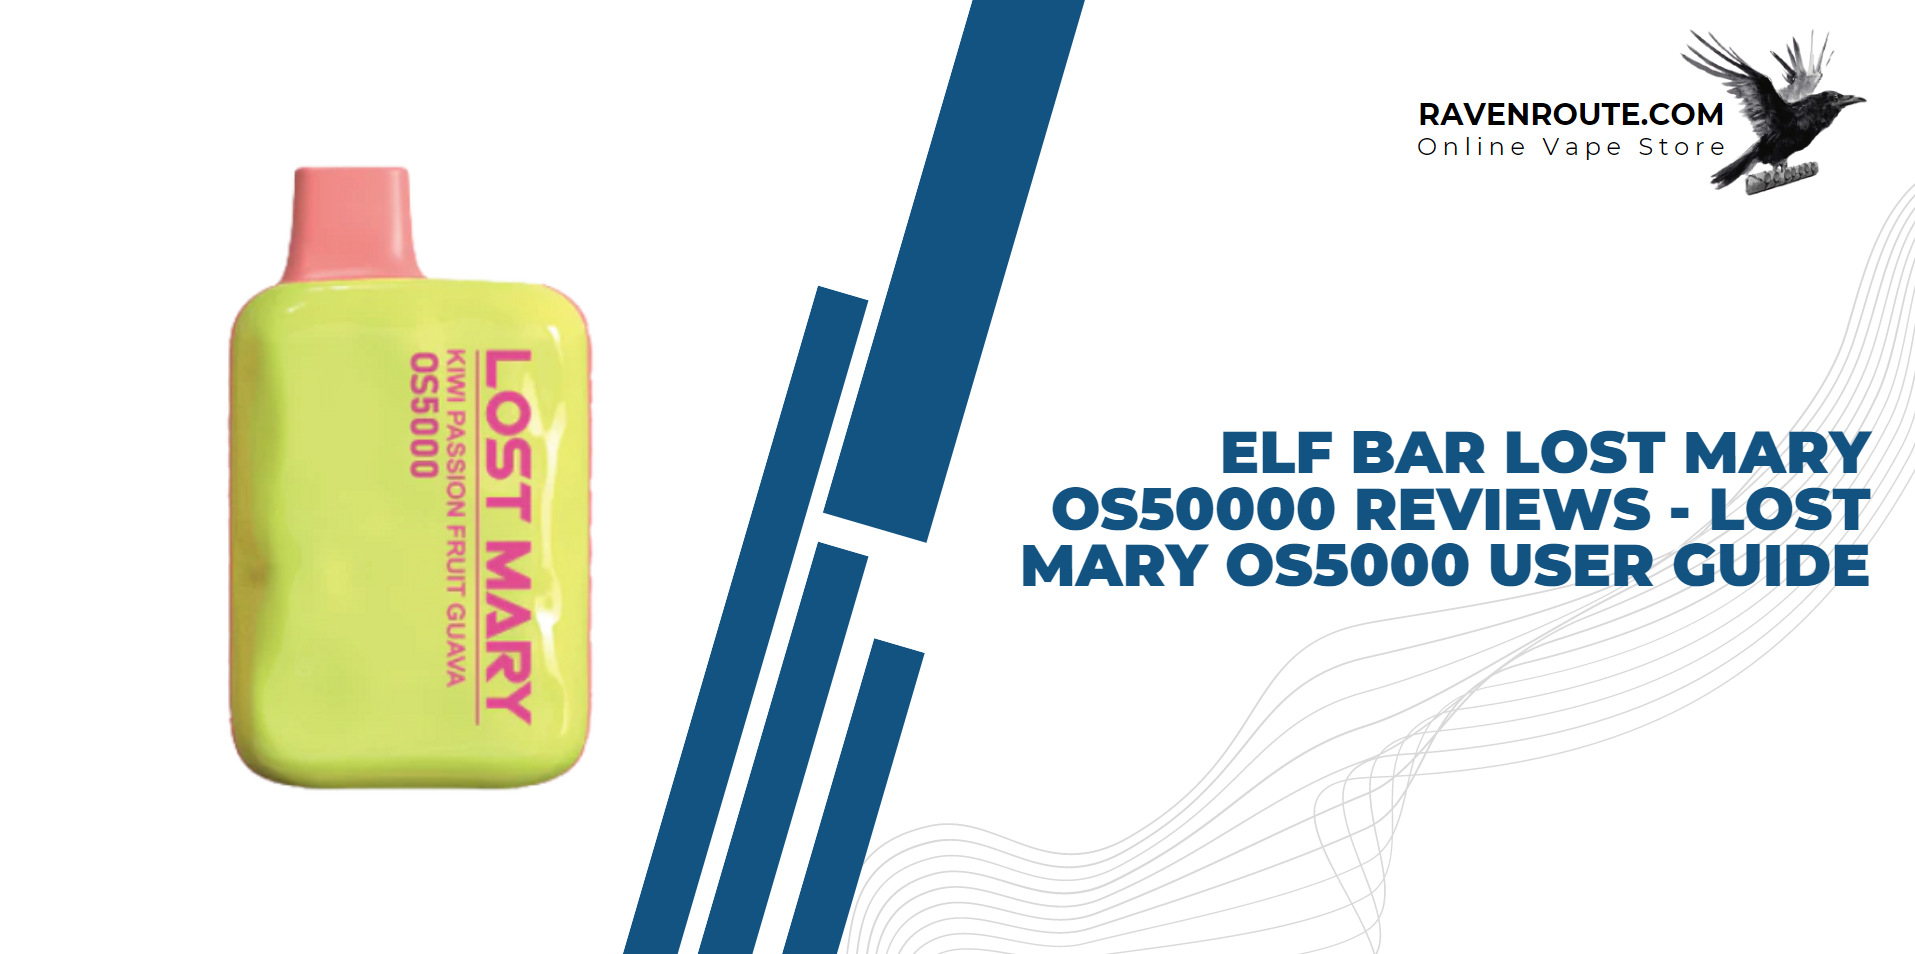 Elf Bar Lost Mary Os50000 Reviews - Lost Mary OS5000 User Guide